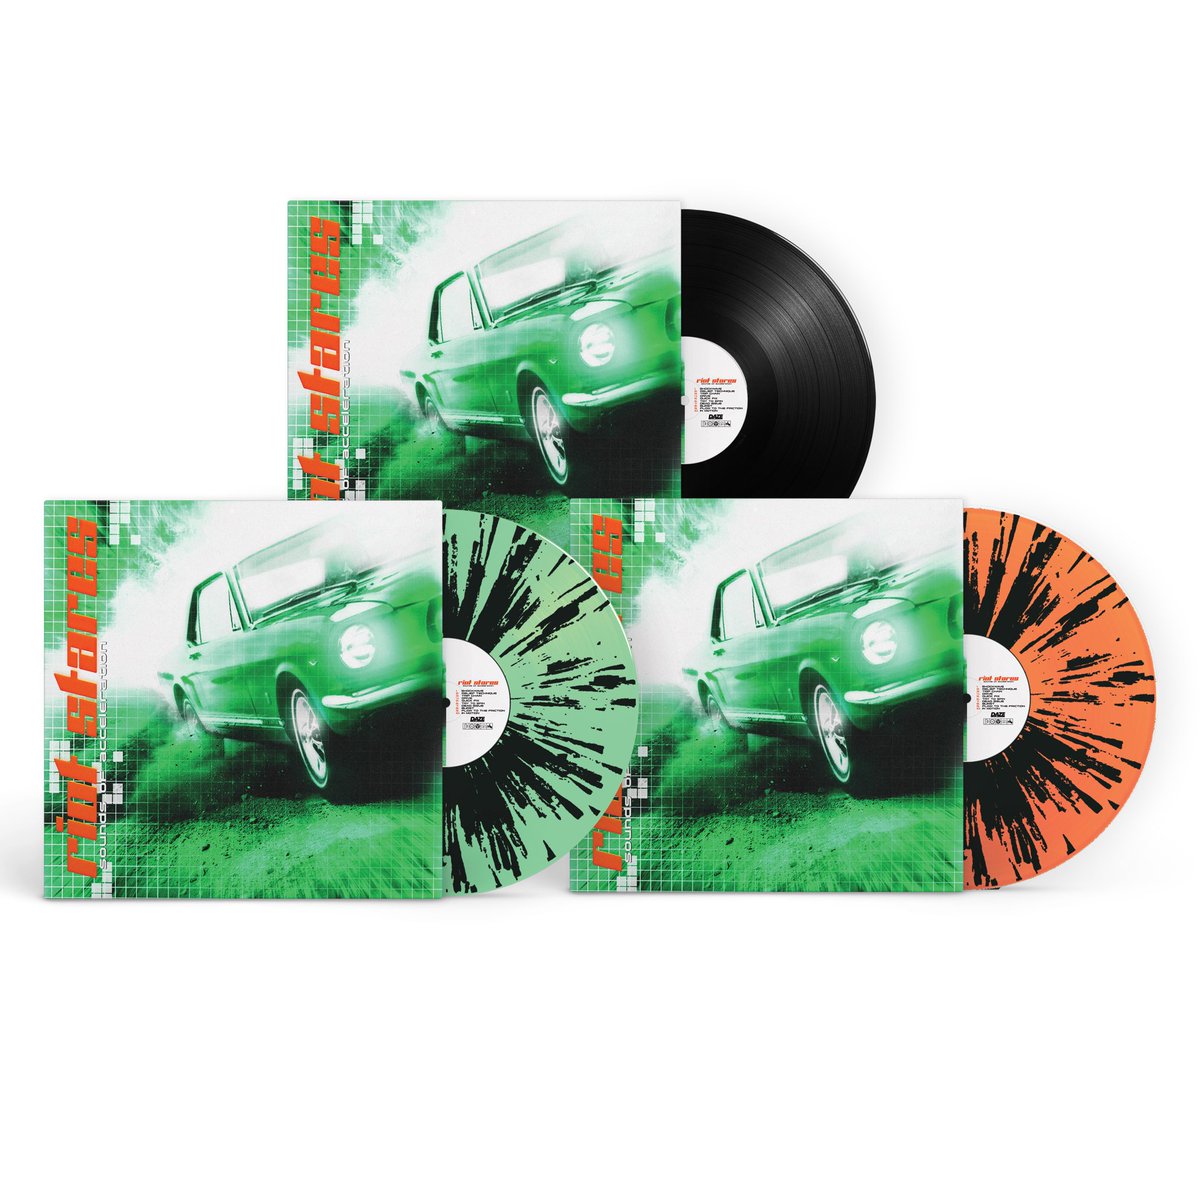 RIOT STARES “SOUNDS OF ACCELERATION” IS OUT NOW… VINYL PREORDERS ARE UP… MINT GREEN WITH SPLATTER VARIANT IS HALFWAY SOLD OUT… SECURE YOUR COPY NOW……. DAZE-STYLE.COM